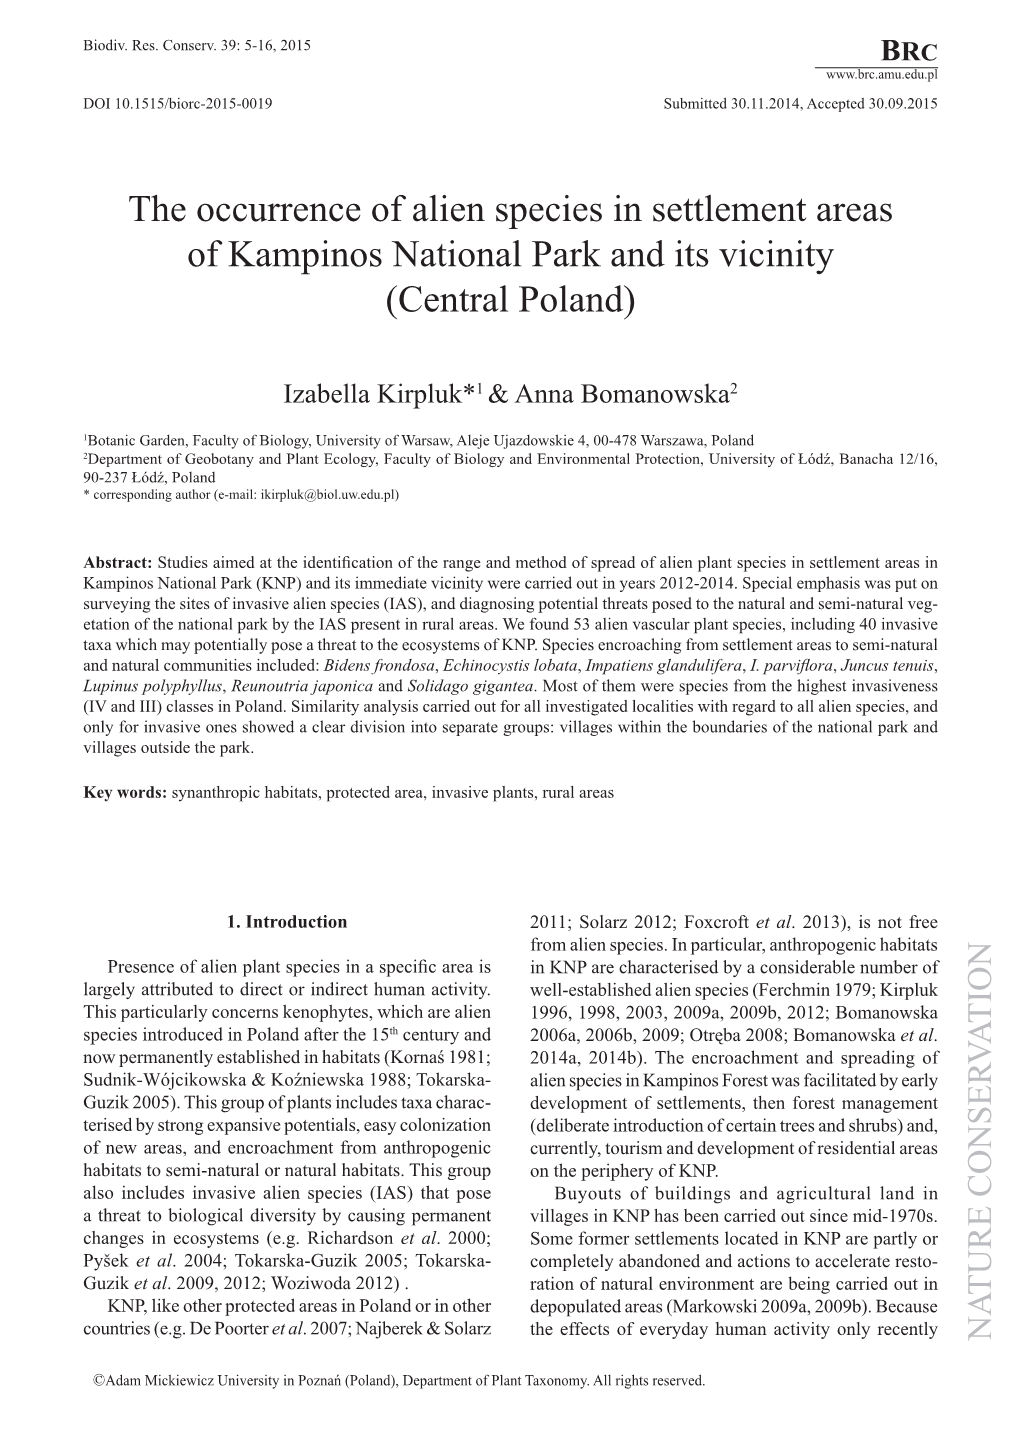 The Occurrence of Alien Species in Settlement Areas of Kampinos National Park and Its Vicinity (Central Poland)